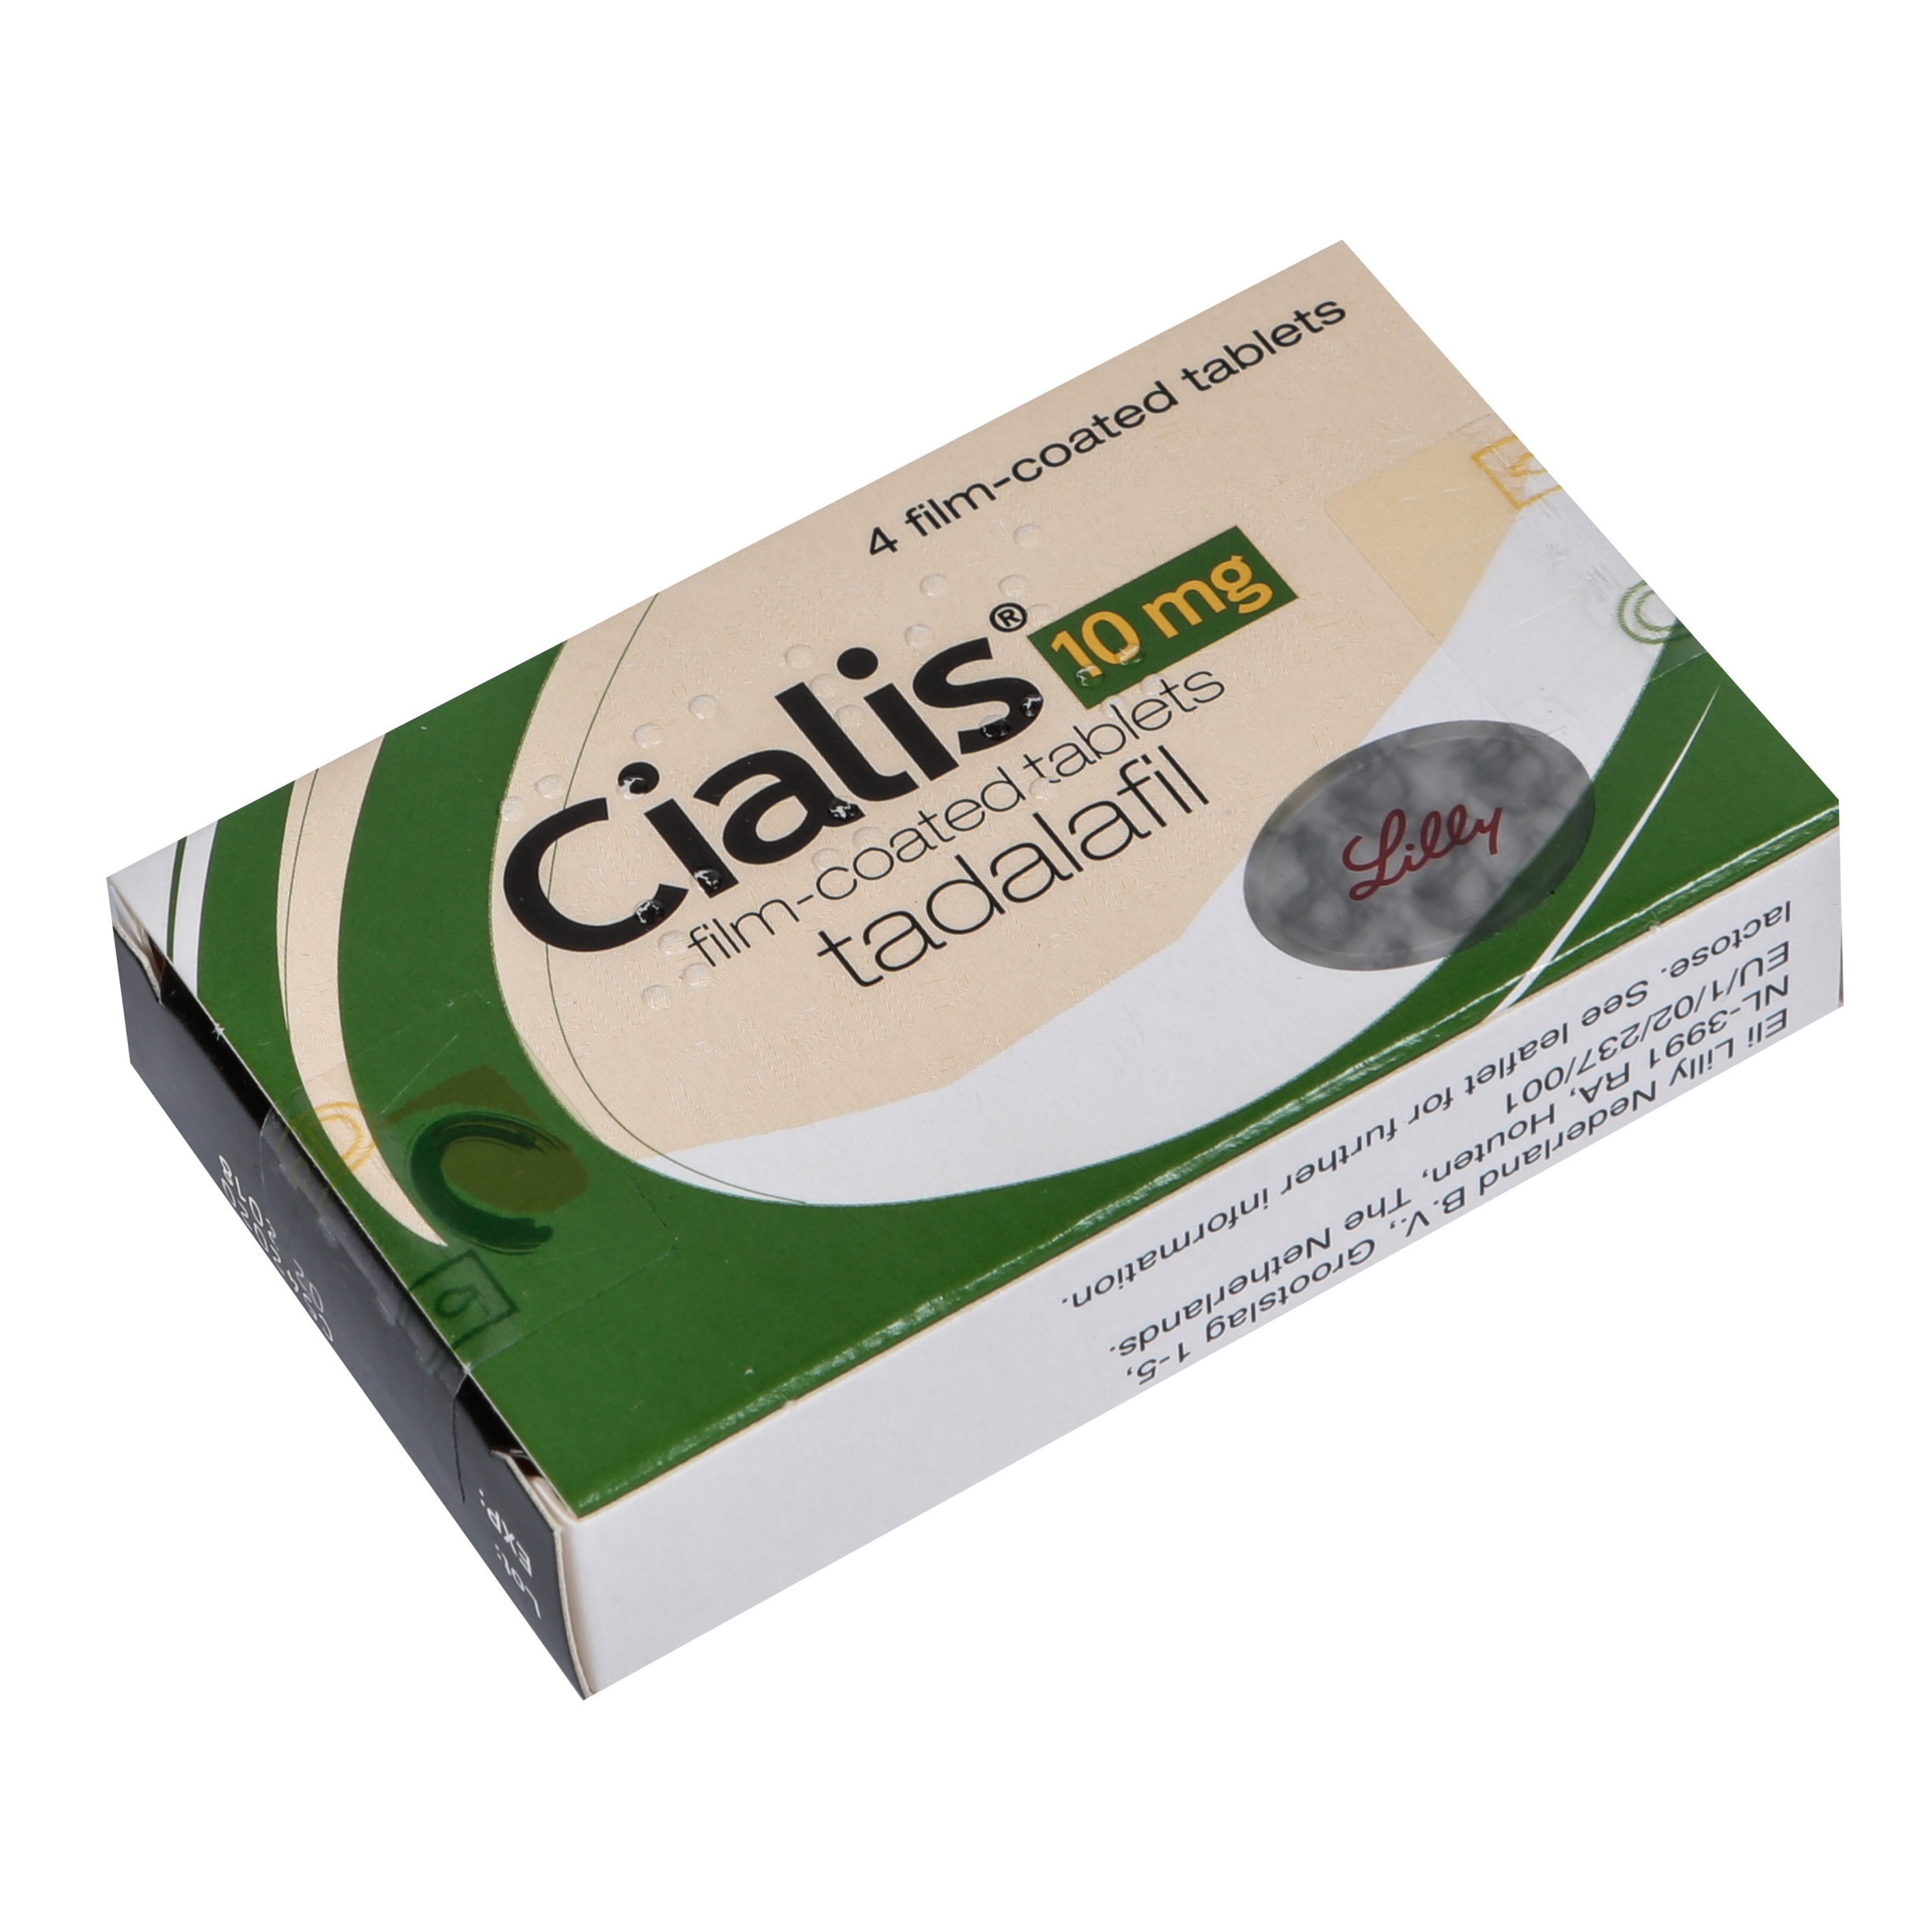 cialis-buy-cialis-online-cialis-tablets-uk-cialis-tablets-from-39-49